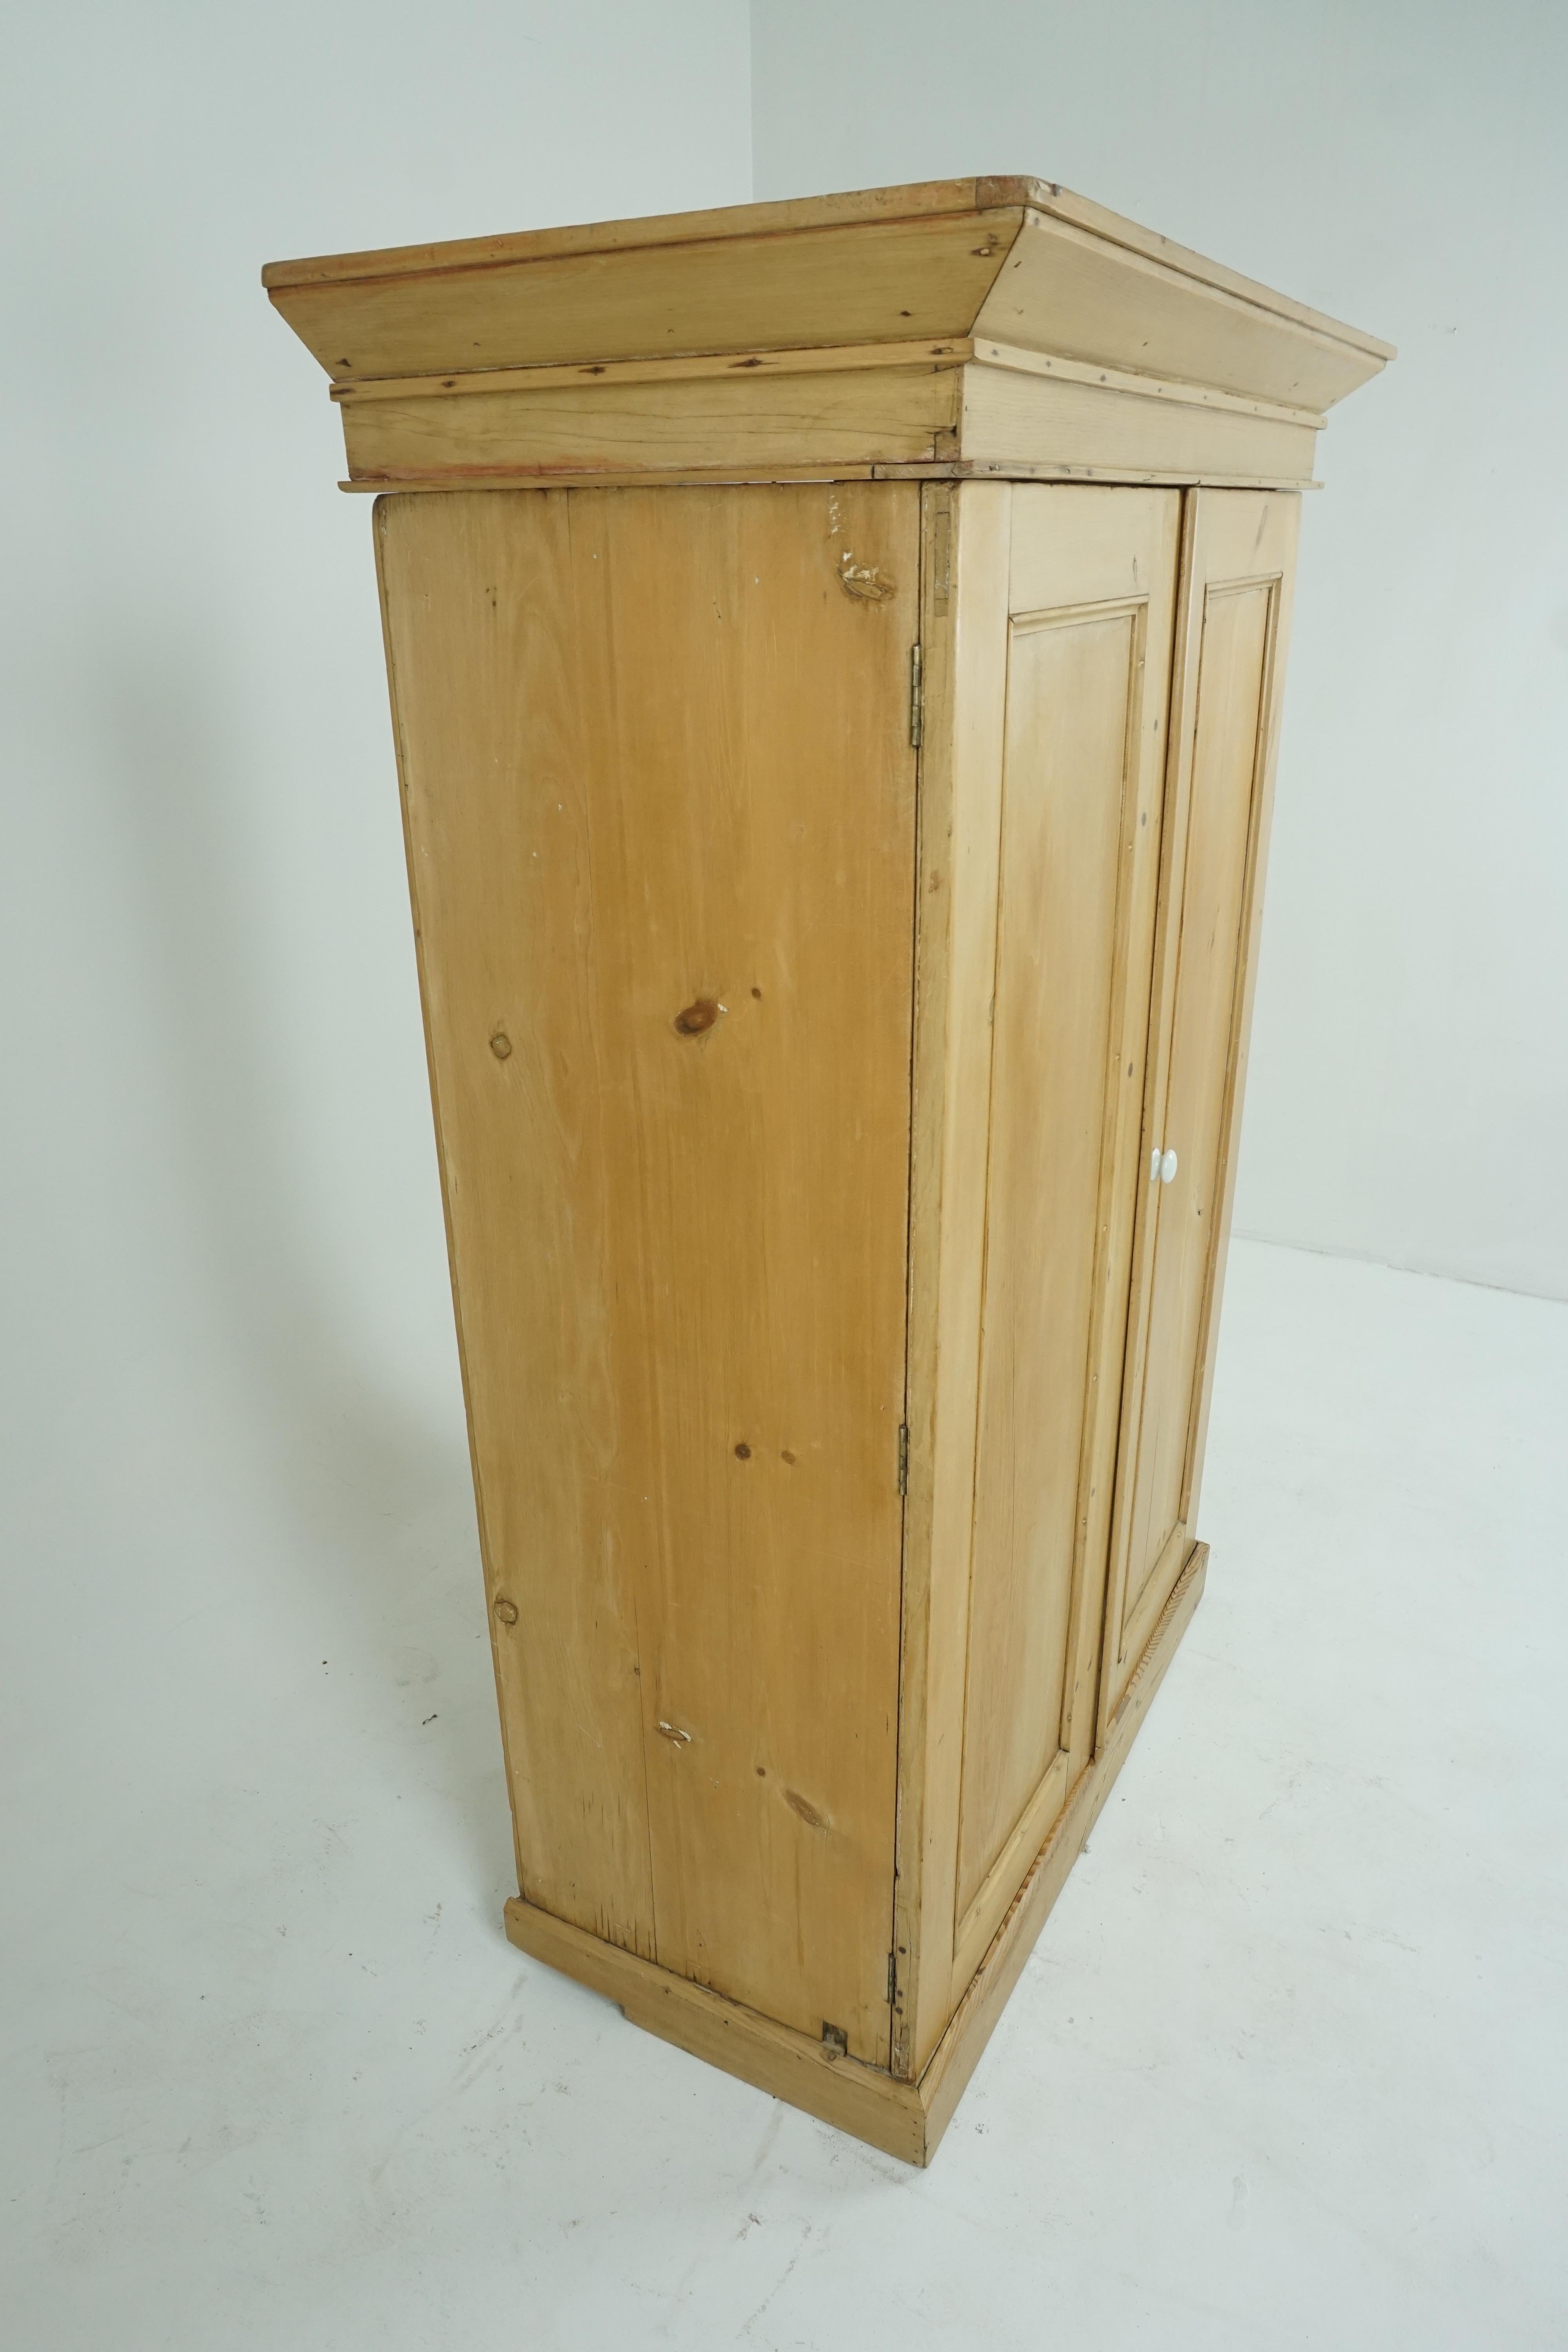 Hand-Crafted Antique Pine Cupboard, Stripped Pine 2 Door Armoire, Scotland, 1880